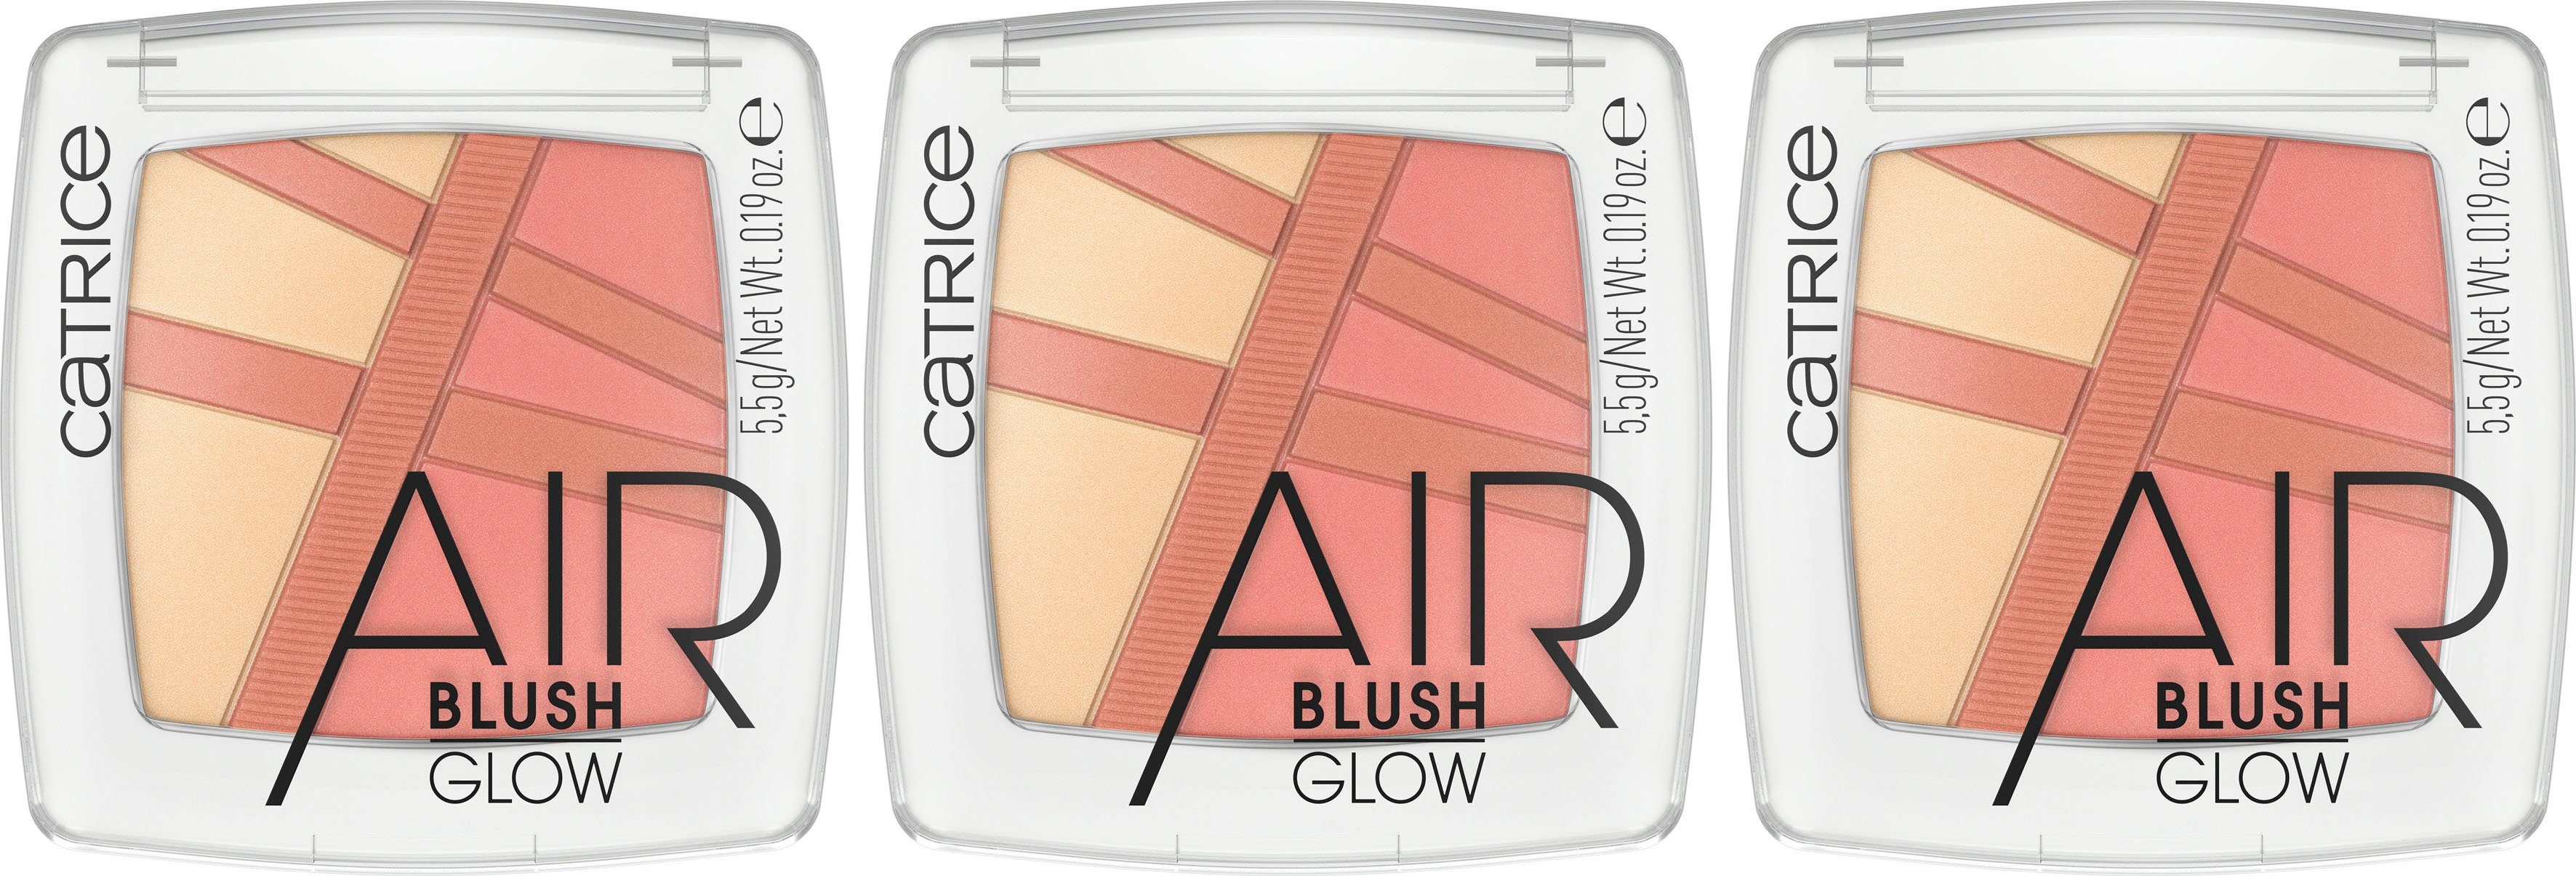 AirBlush Glow, Rouge Catrice Catrice